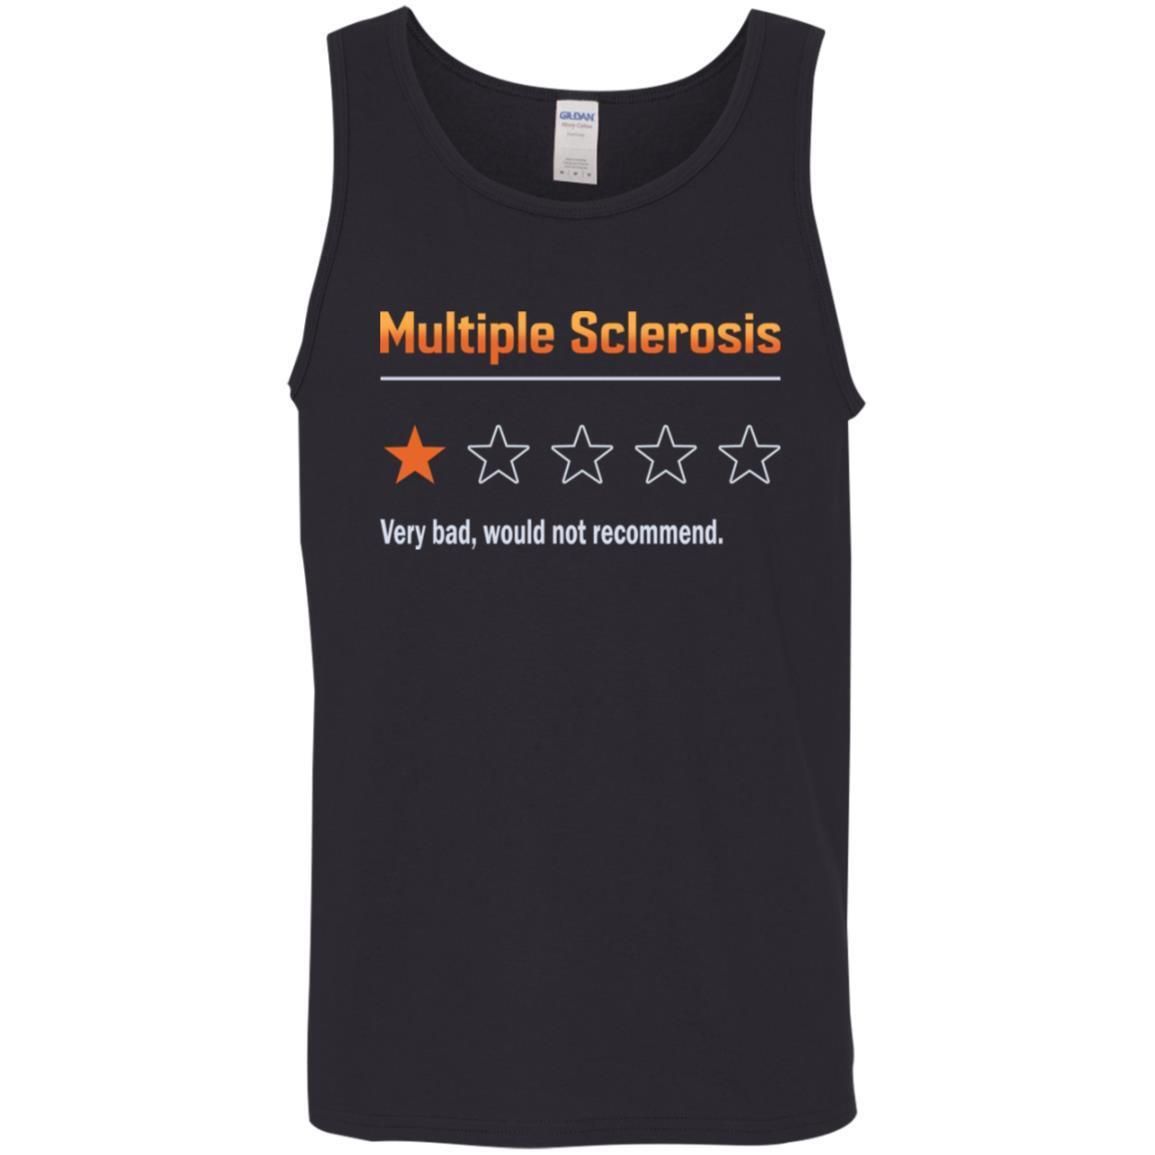 Multiple Sclerosis Very Bad Would Not Recommend shirts